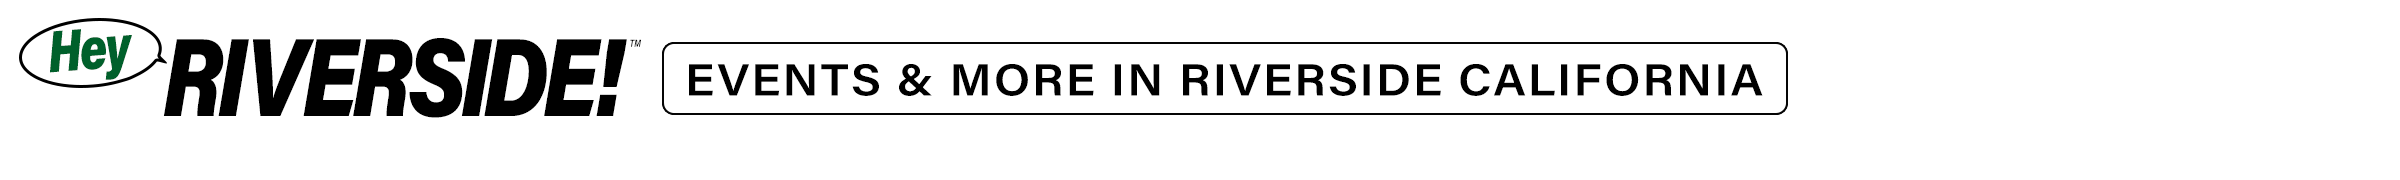 Hey Riverside! Events and more in Riverside California